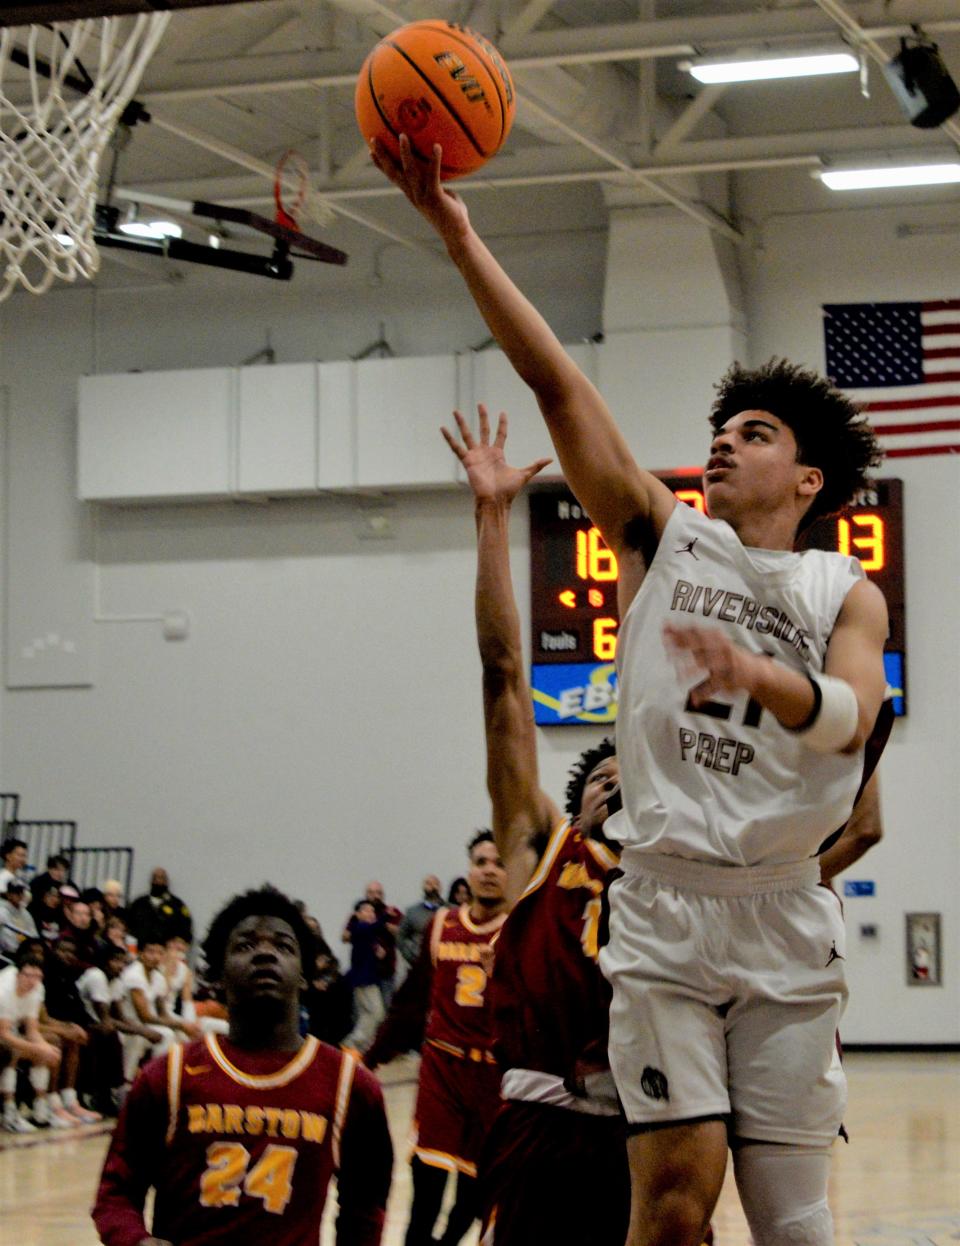 Riverside Prep's Raoul Churchill drives to the basket for a layup against Barstow on Wednesday, Feb. 8, 2023.